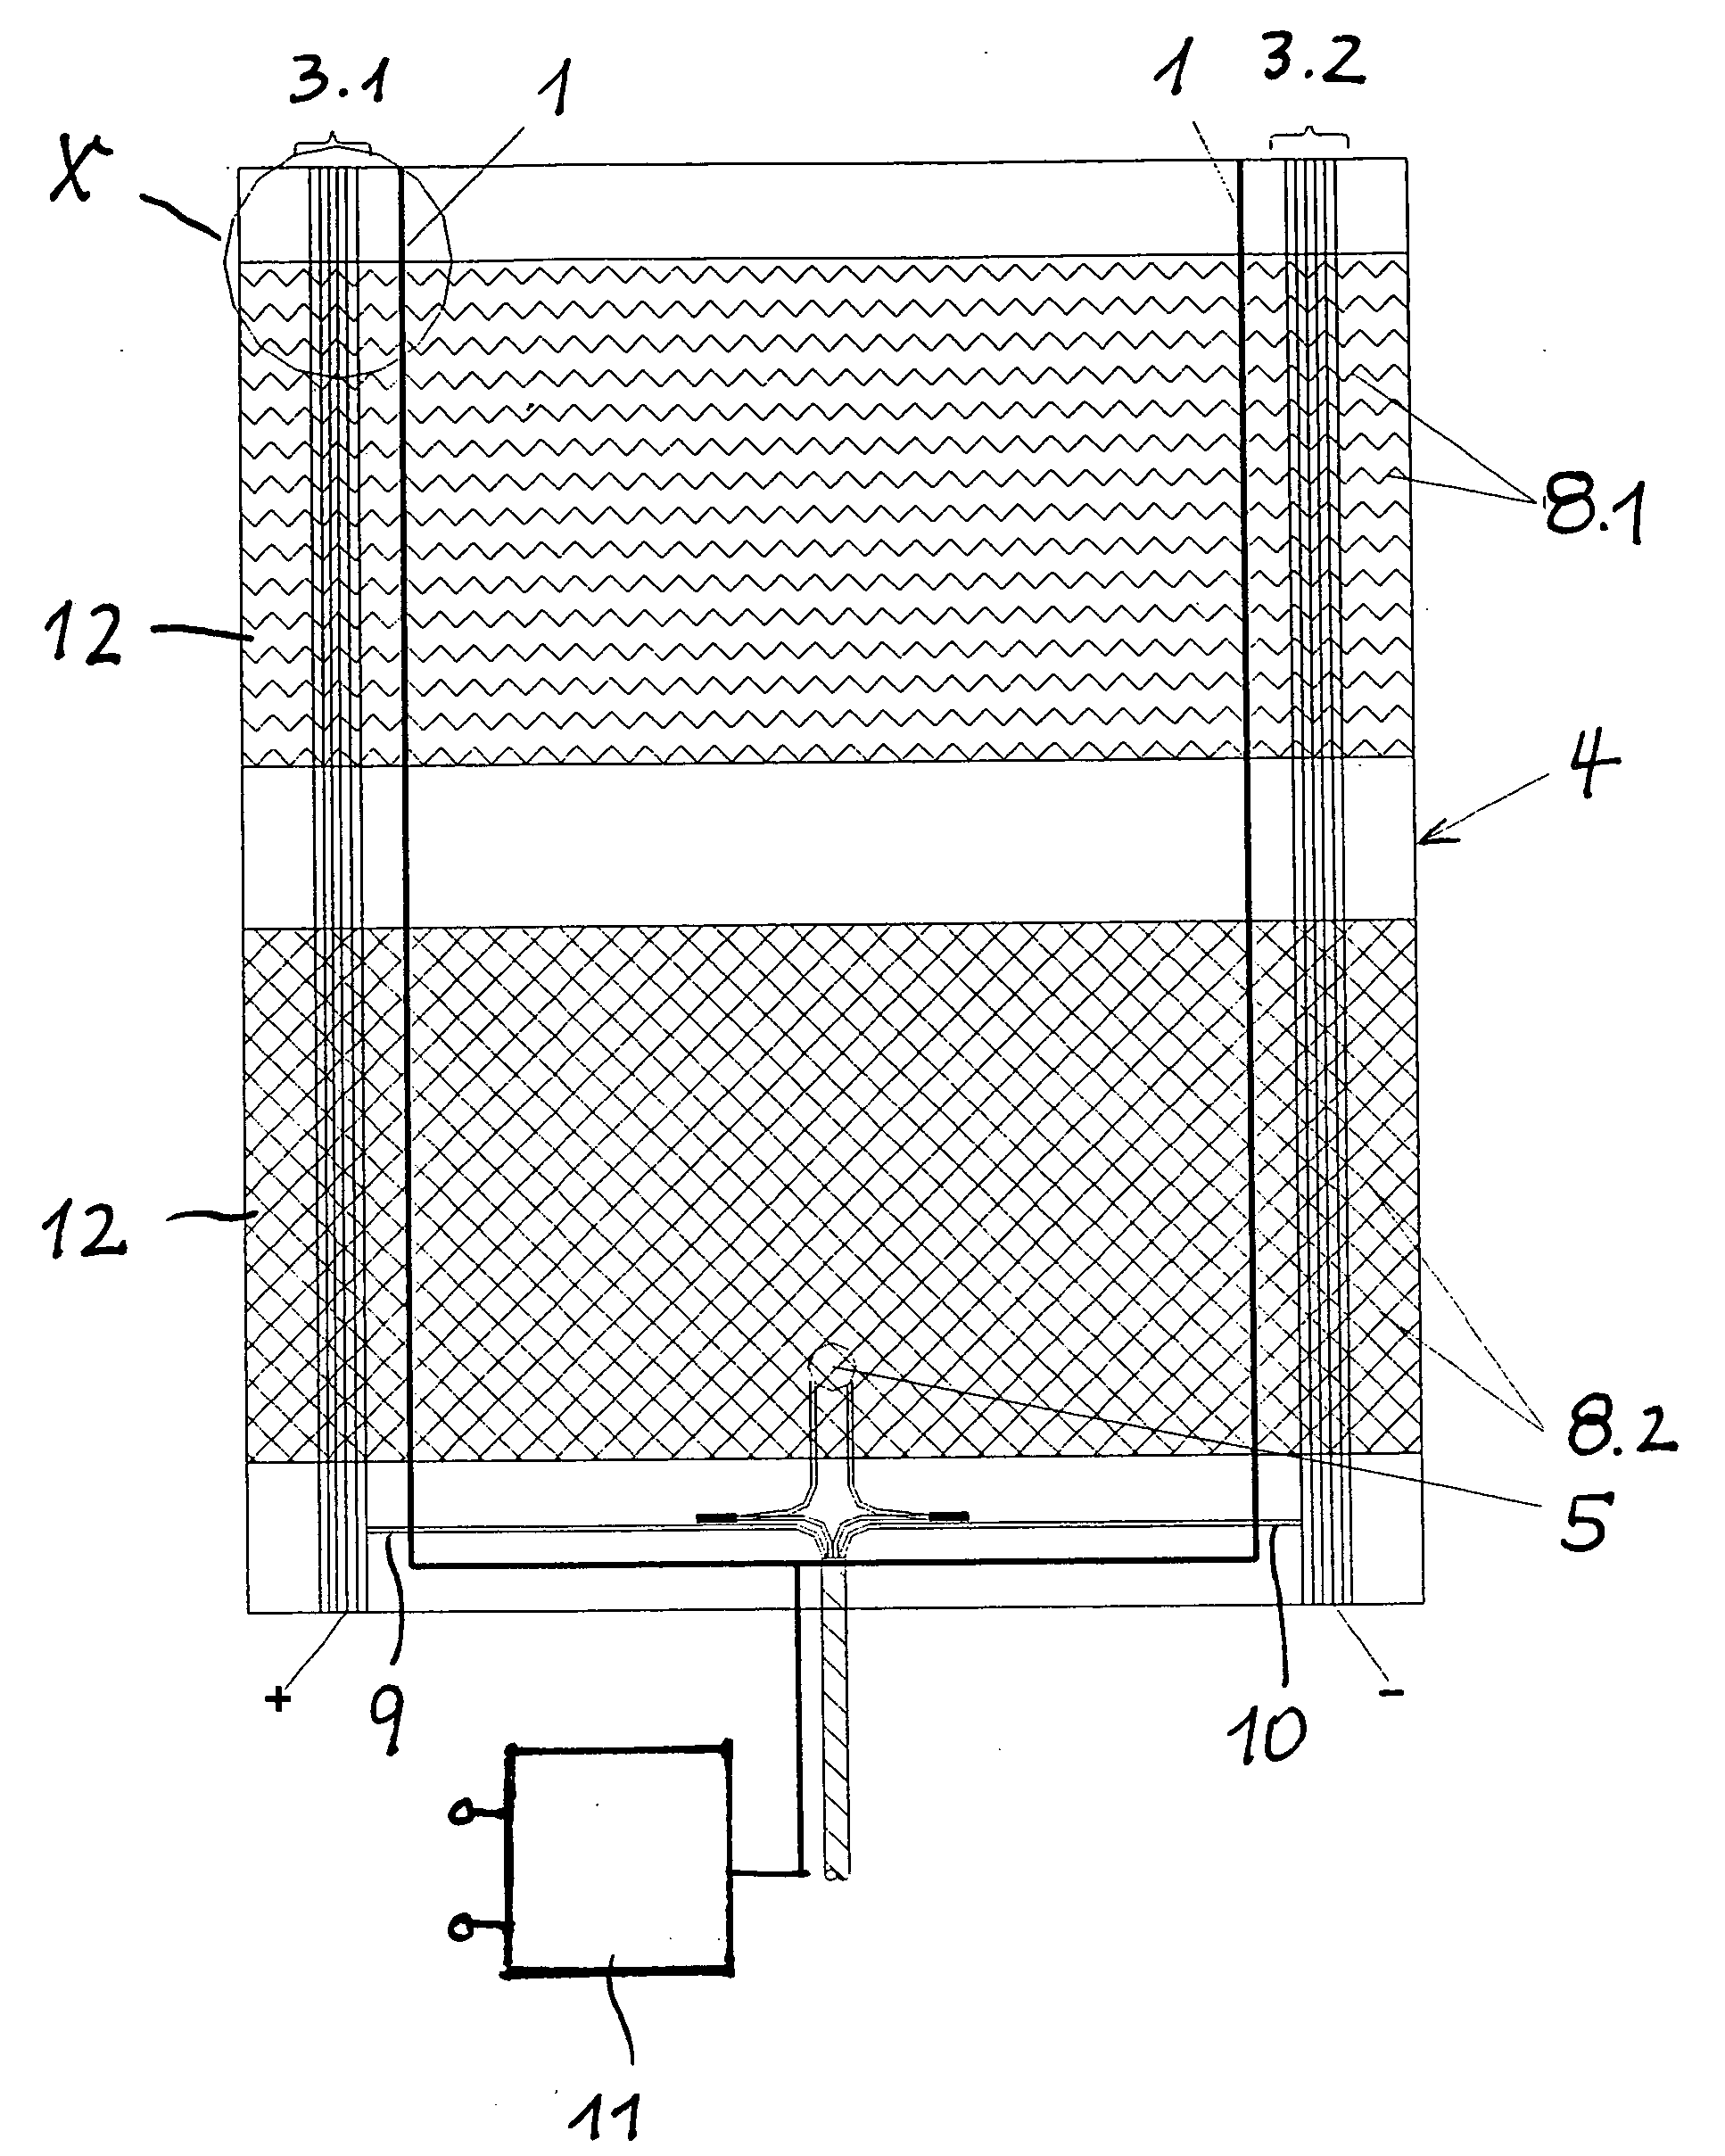 Monitoring device for flexible heating elements